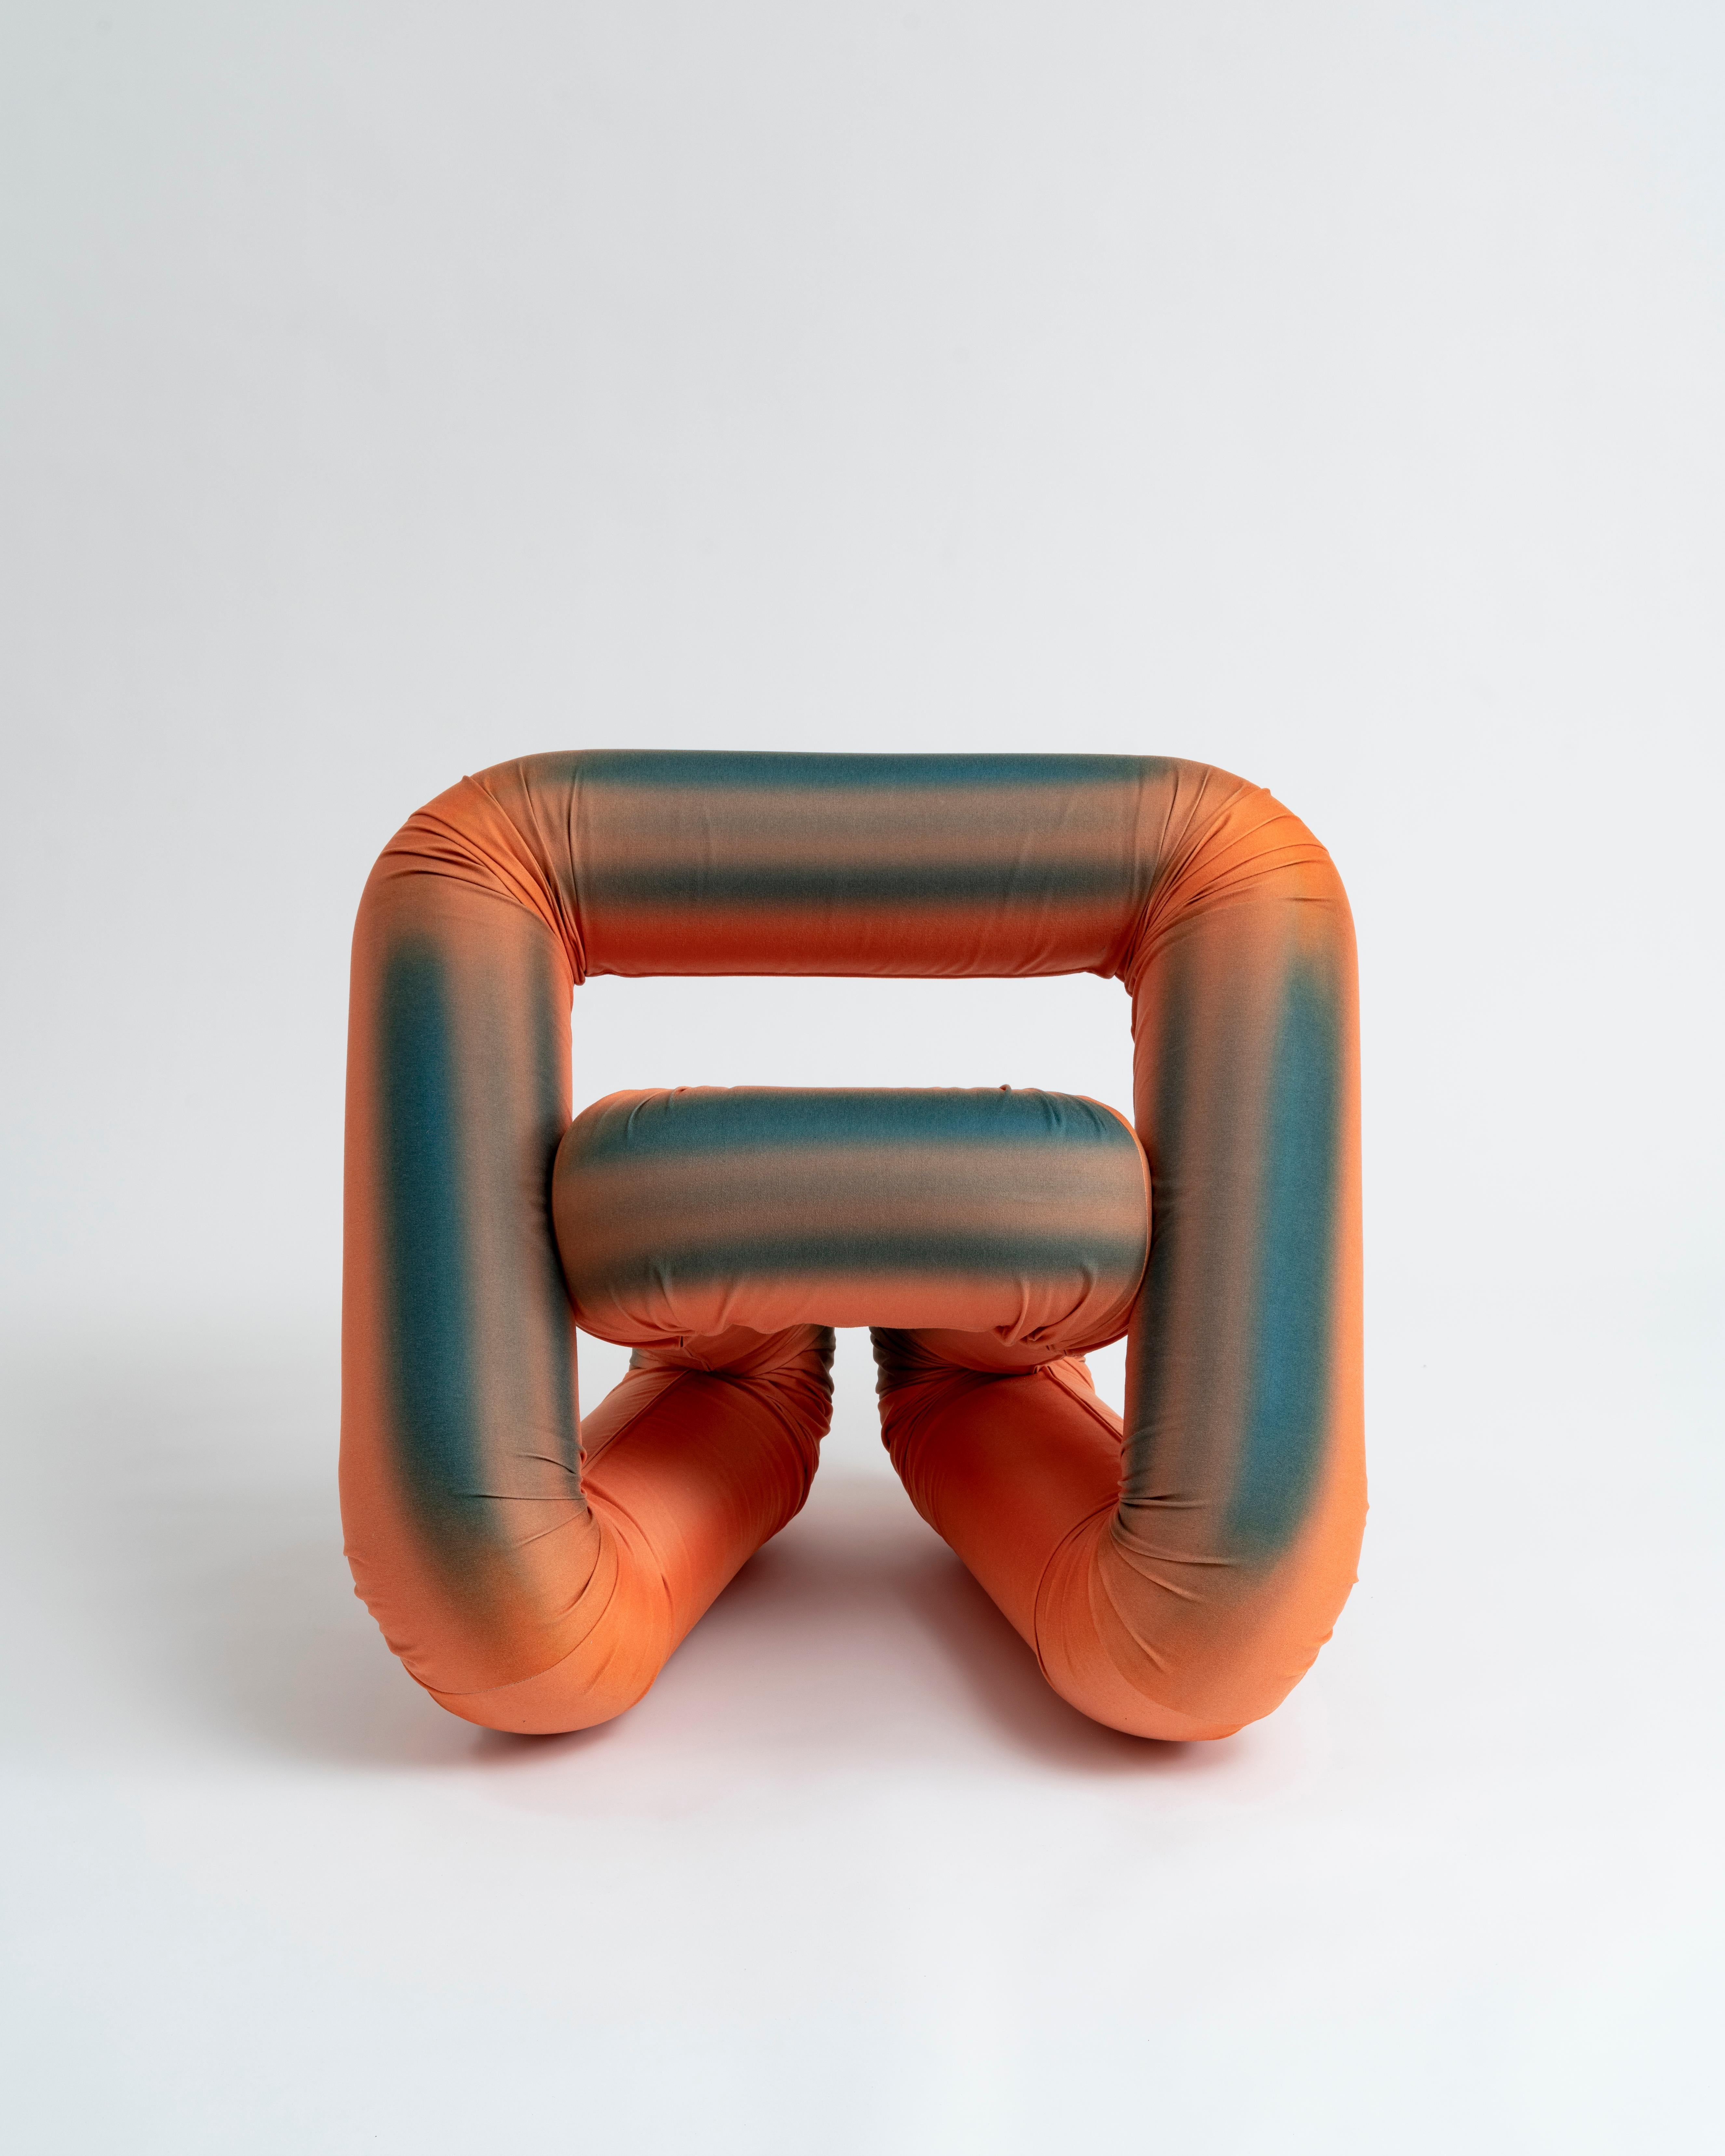 Bradley Bowers’ 'Frank' hardly resembles a chair at all—there’s no obvious seat, and the tubular form gives it a psychedelic pool noodle vibe. Yet the New Orleans-based designer obsessed over its ergonomics and optimized the central opening so it’s